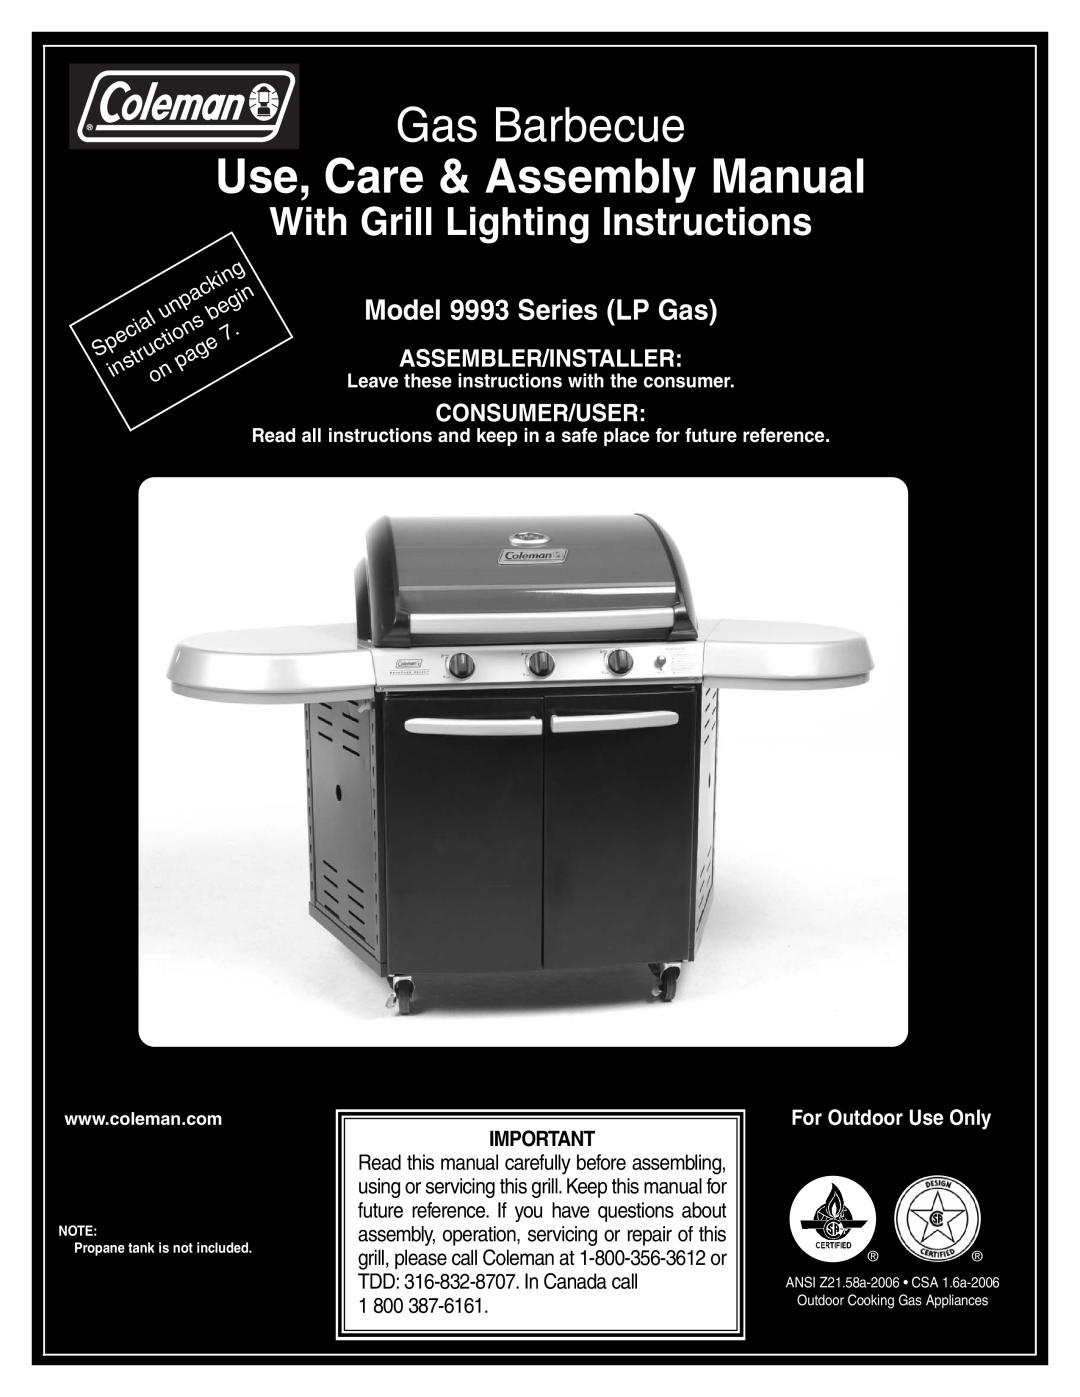 Coleman 9993 manual Assembler/Installer, Consumer/User, Leave these instructions with the consumer, Gas Barbecue, Special 